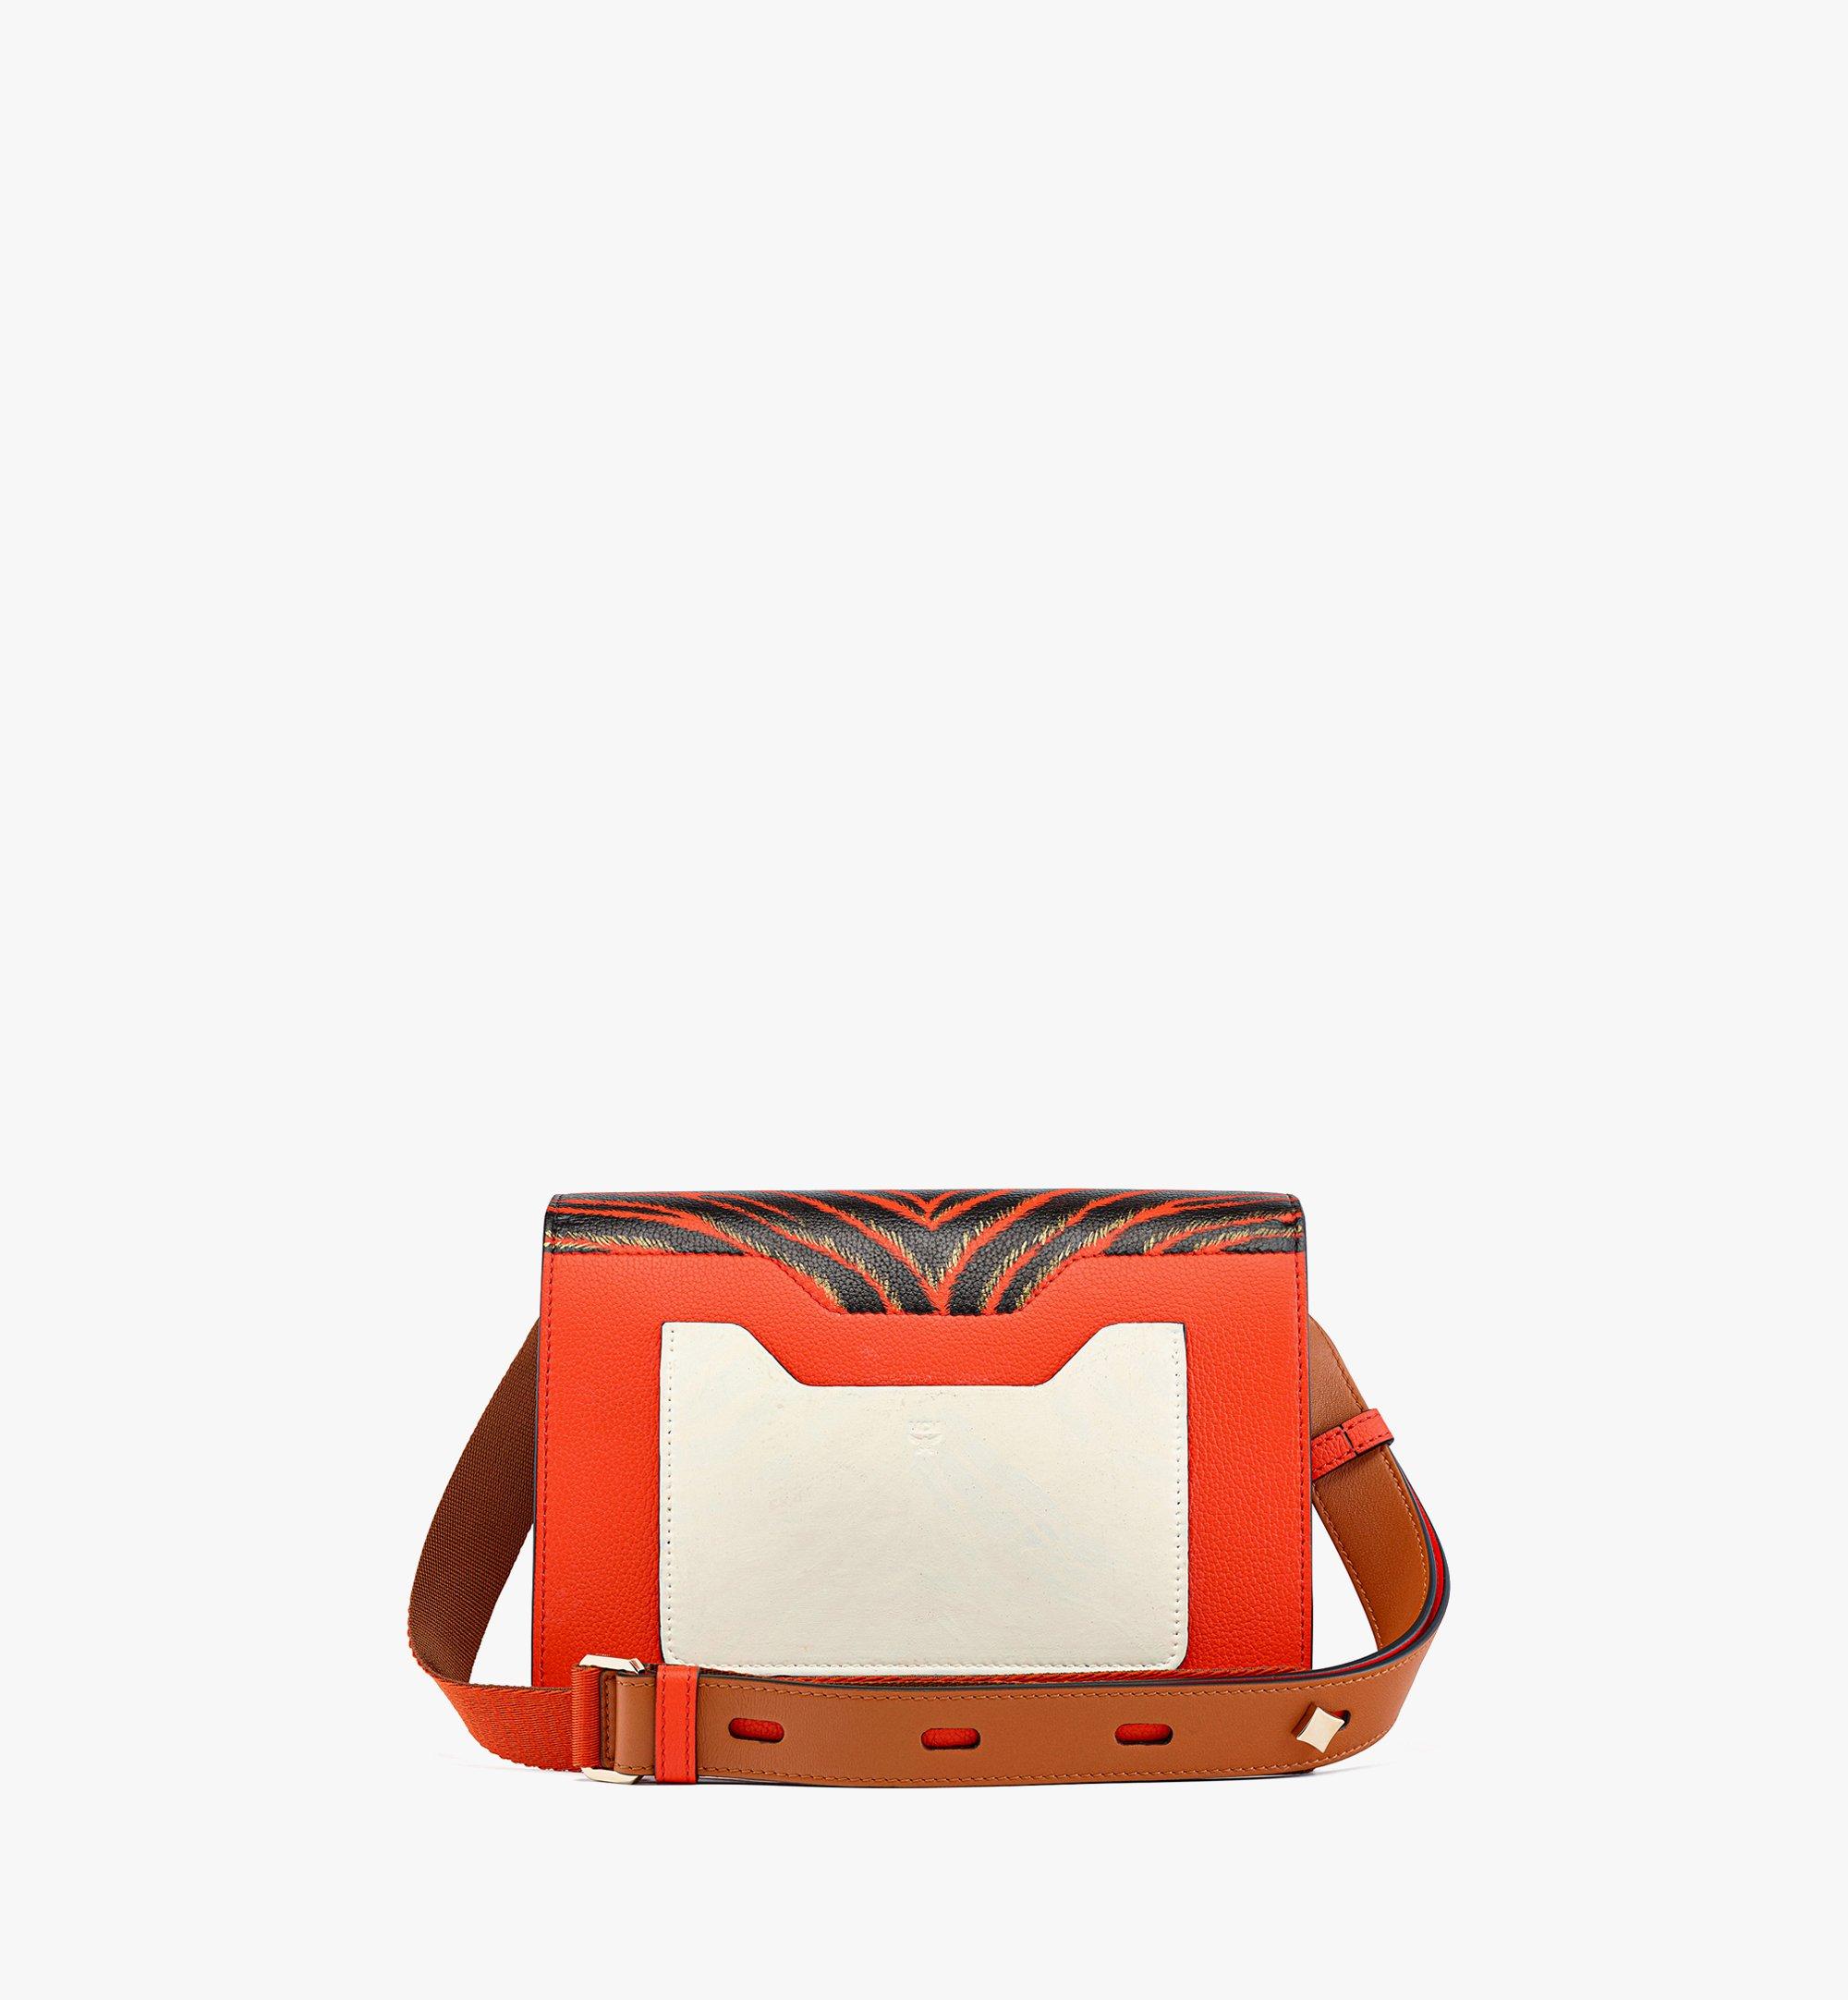 MCM Upcycling Project Tiger Milano Shoulder Bag in Calf Leather Orange MWSCSUP02OI001 Alternate View 3